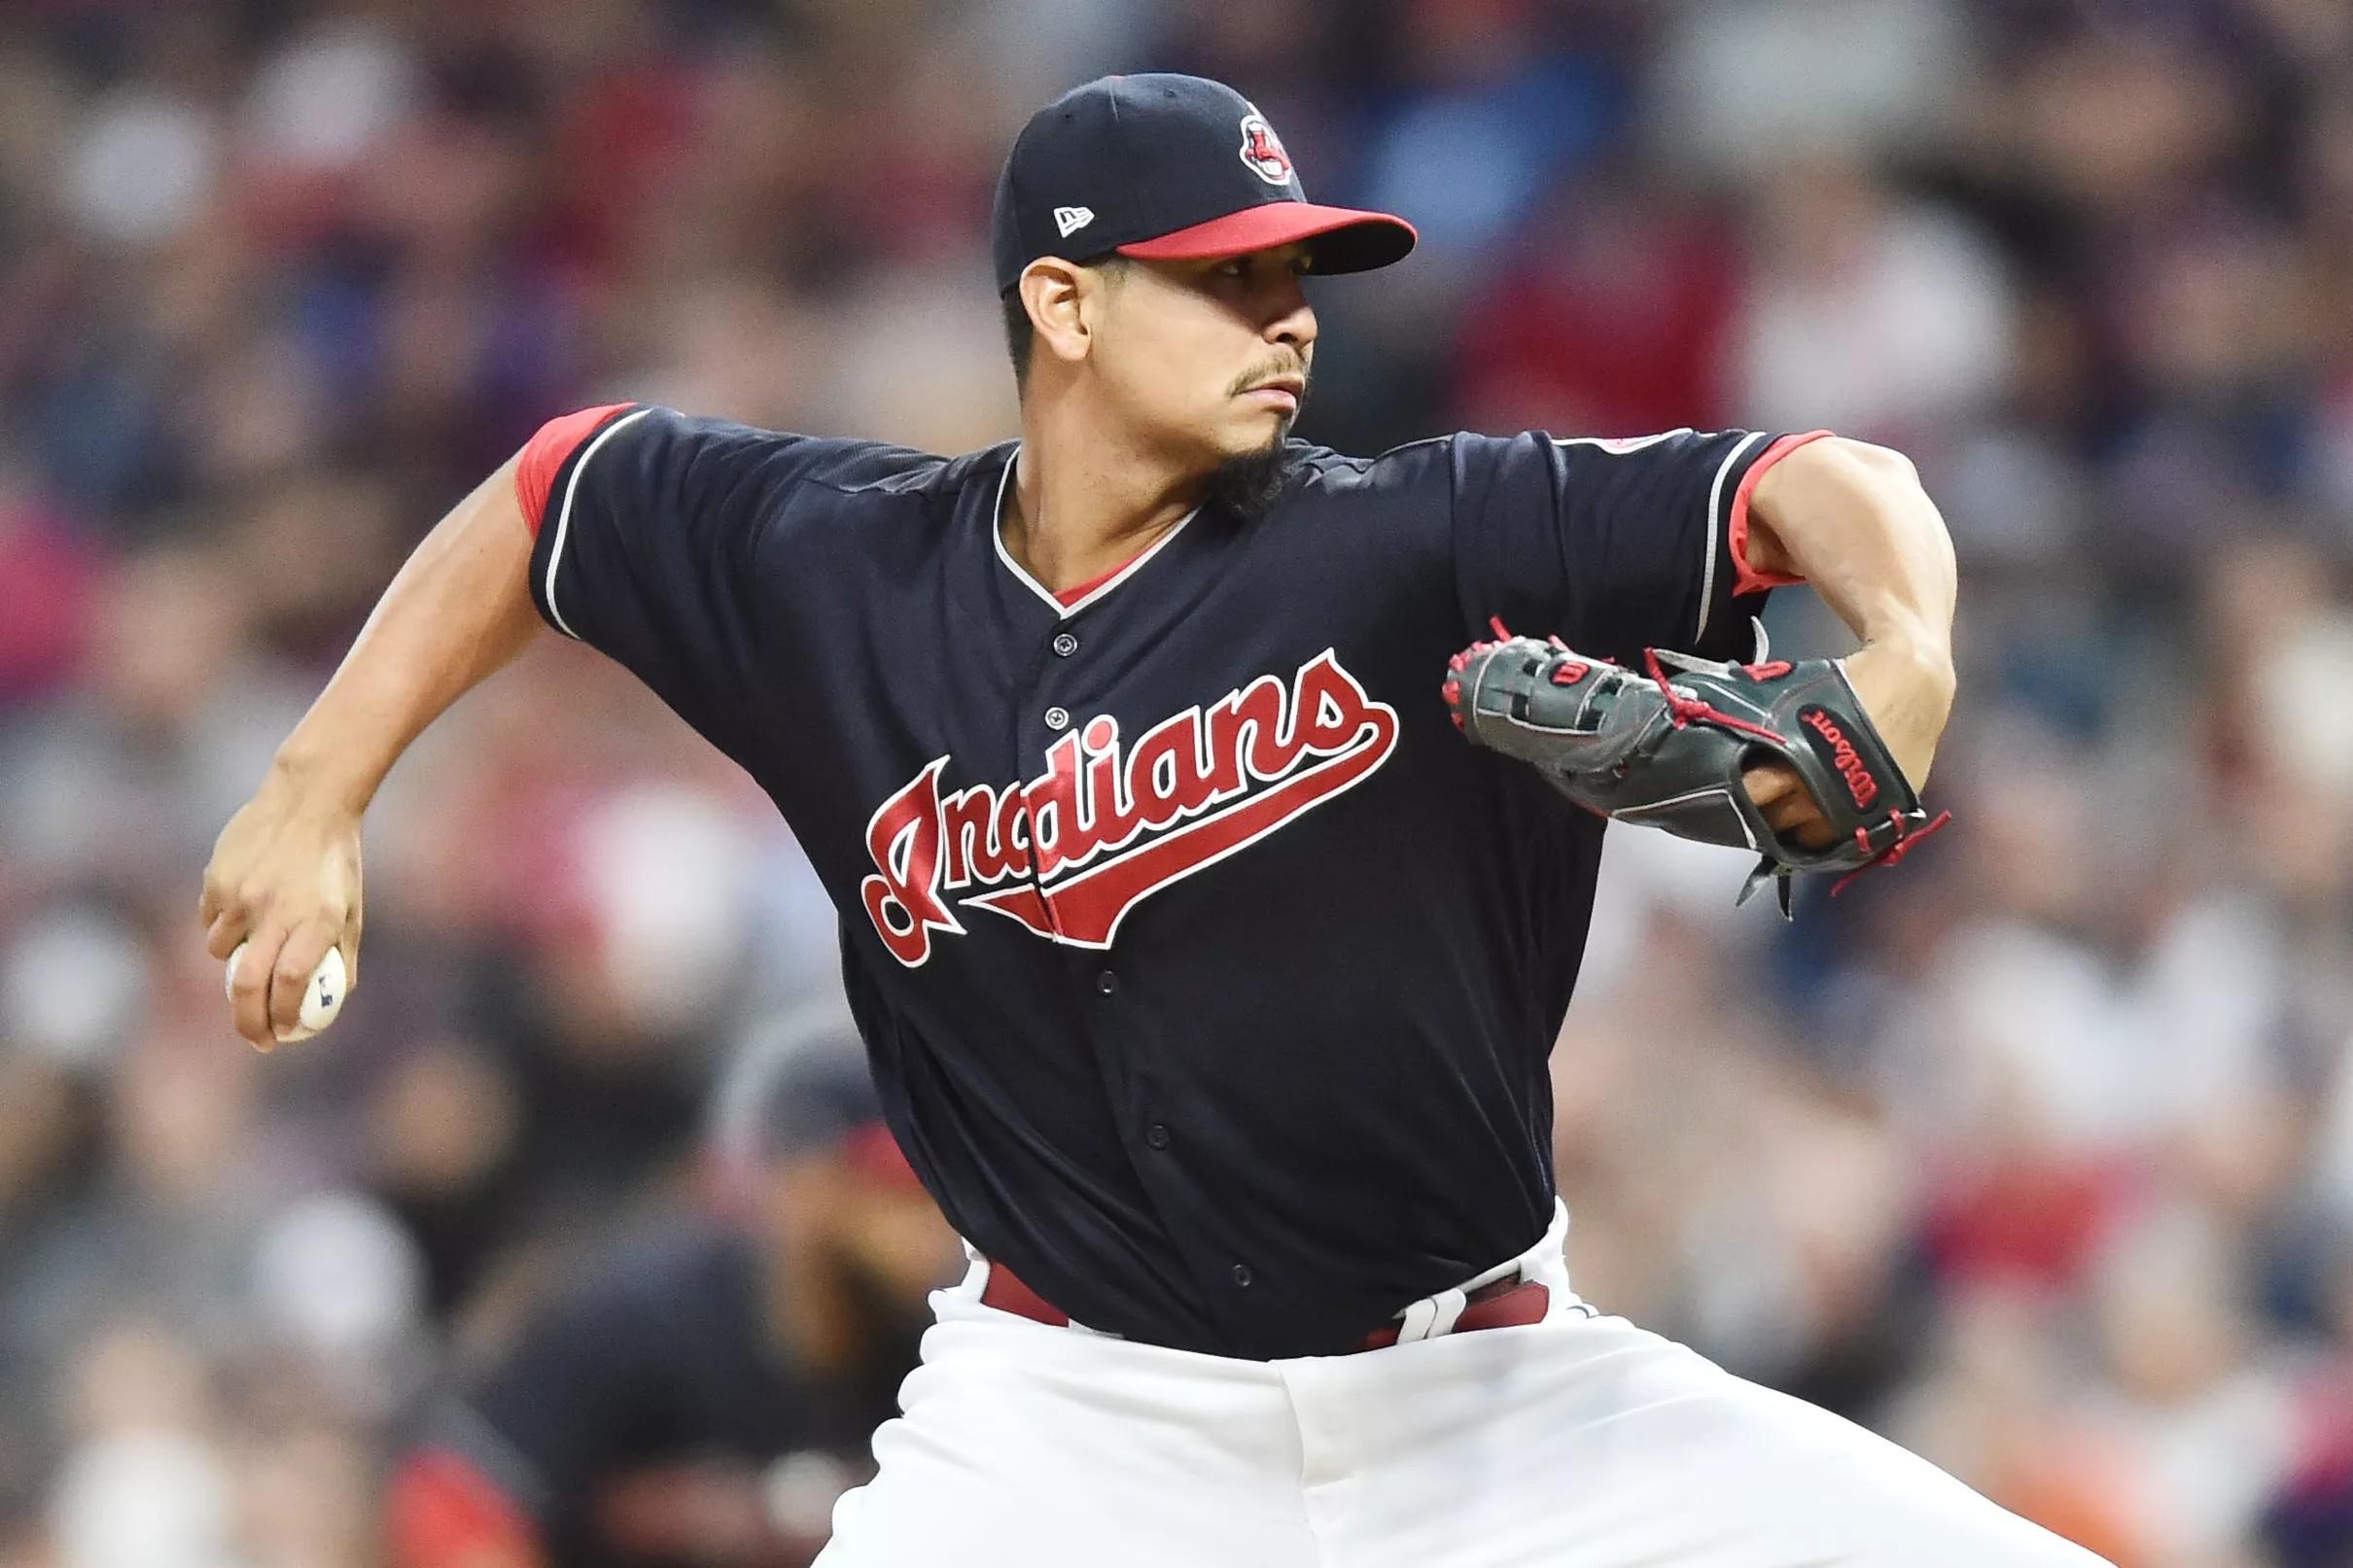 Carlos Carrasco looks to silence Royals